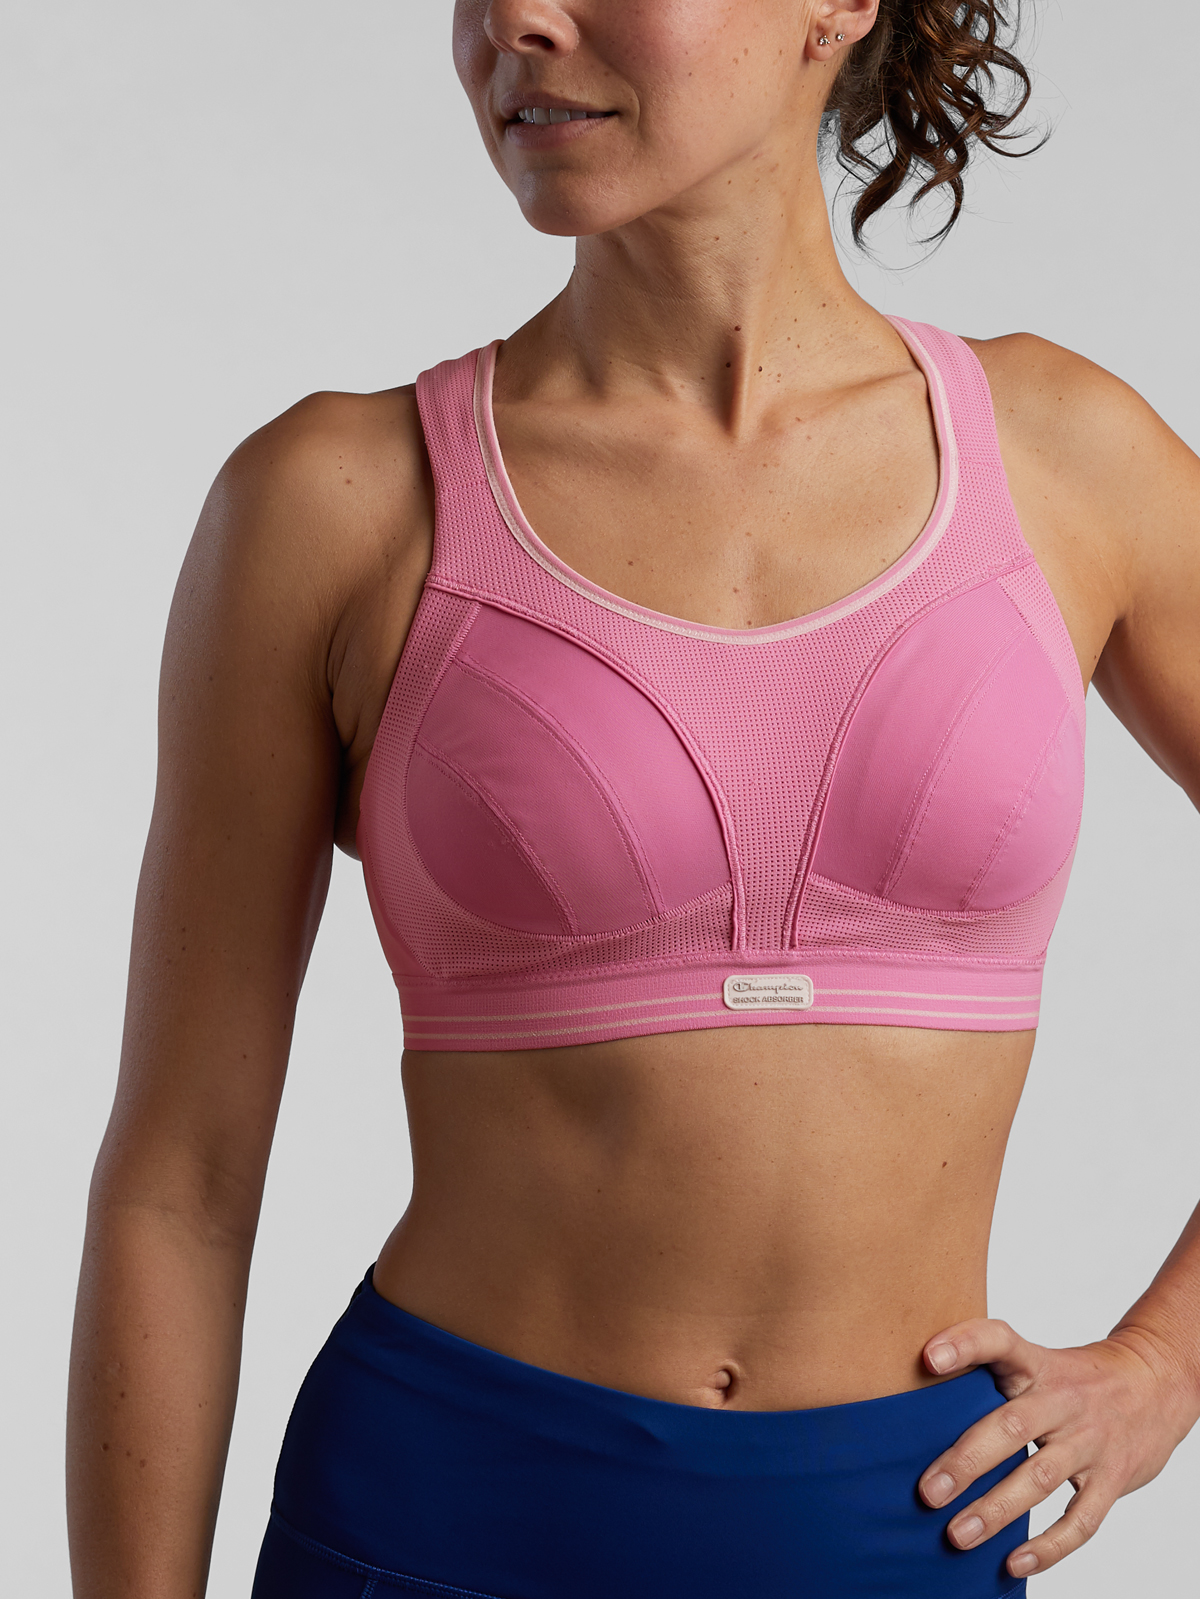 Our first Lace Up Sport Bra keeps you powered up with support for